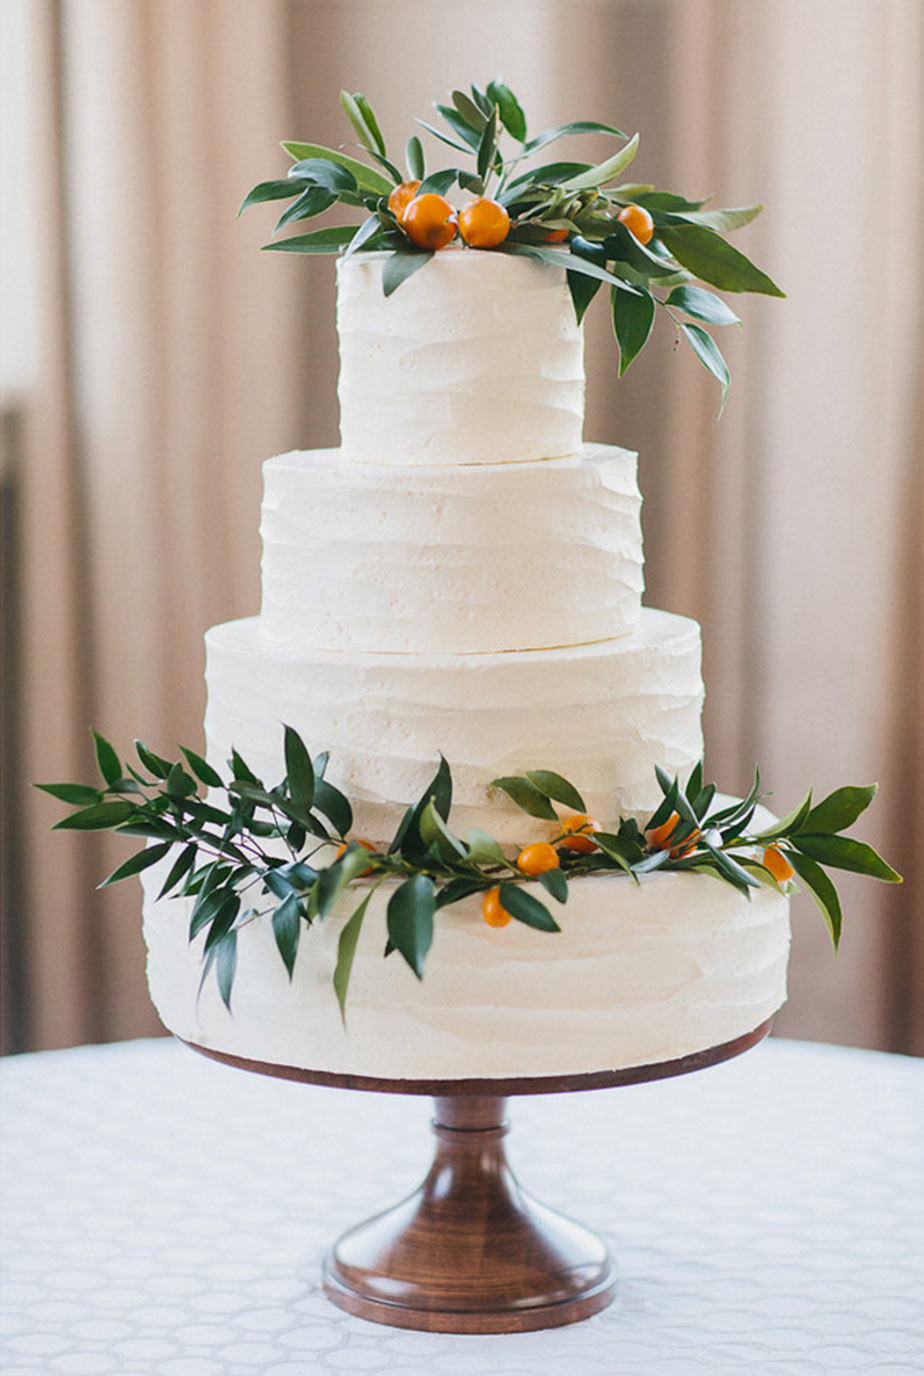 White buttercream wedding cake with floral greenery and kumquats